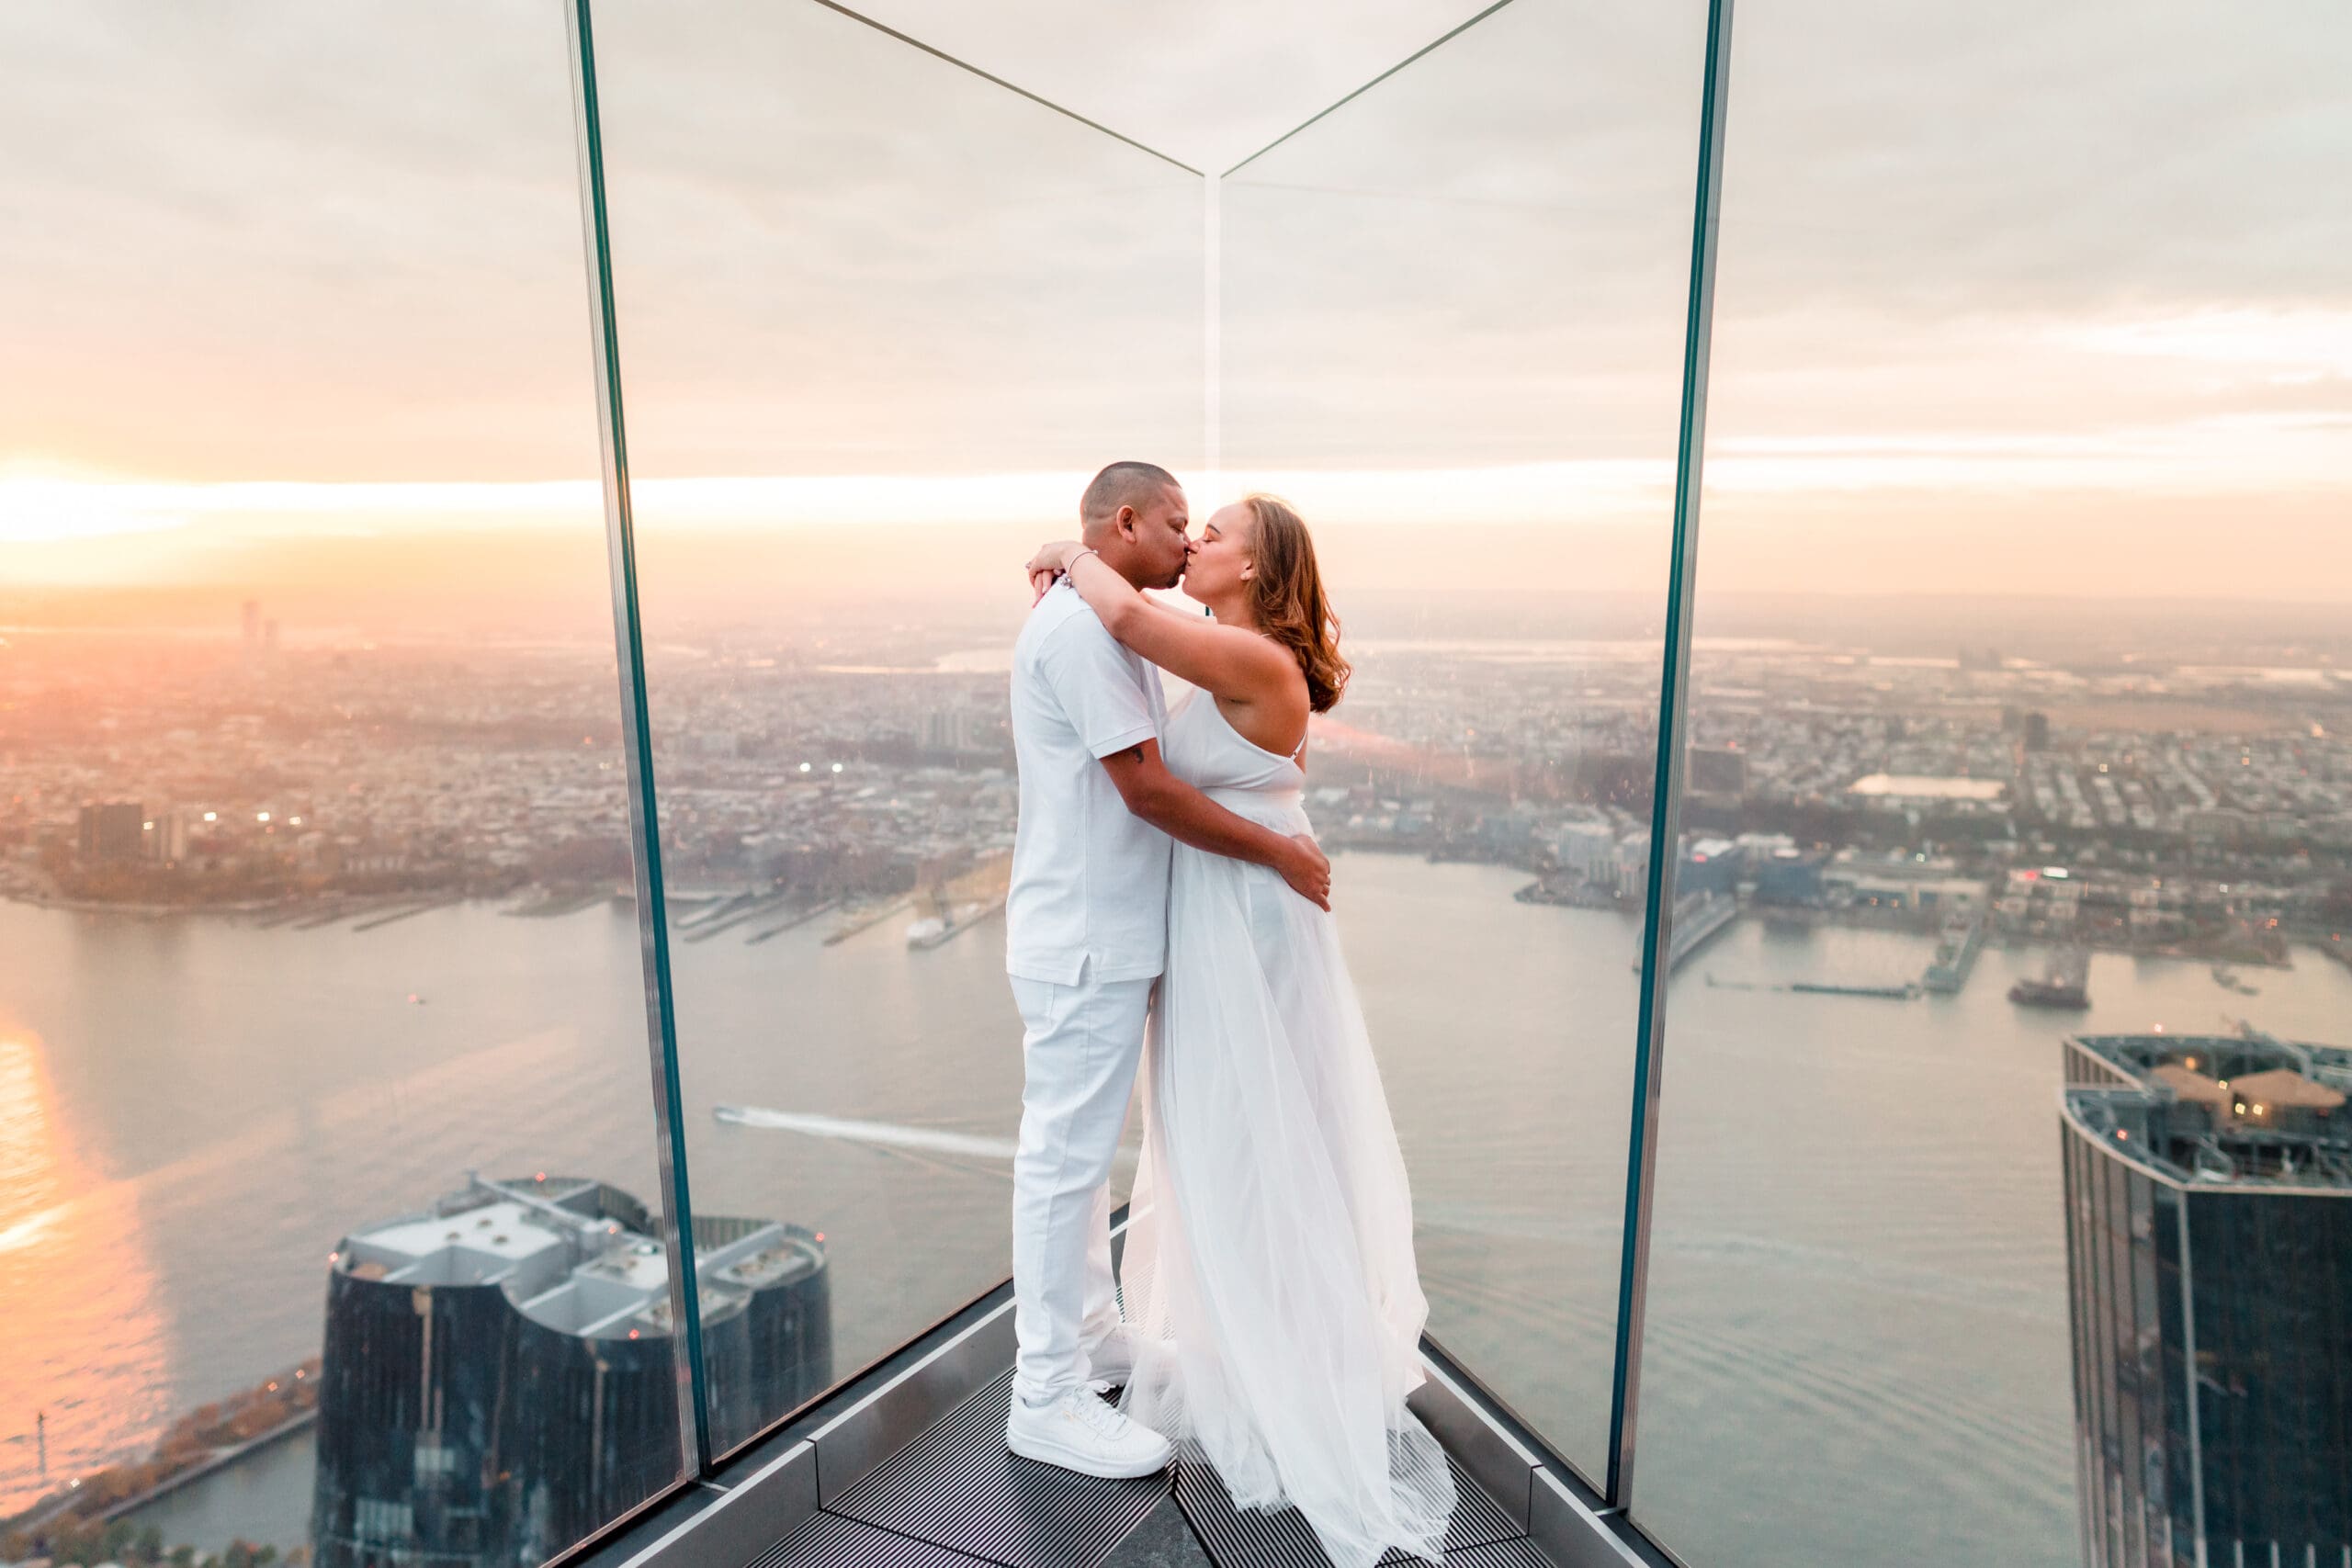 Romantic embrace at The Edge, Hudson Yards, New York: Couple shares a passionate kiss and hug, seated with water in the background, capturing the beauty of their love against the iconic skyline.